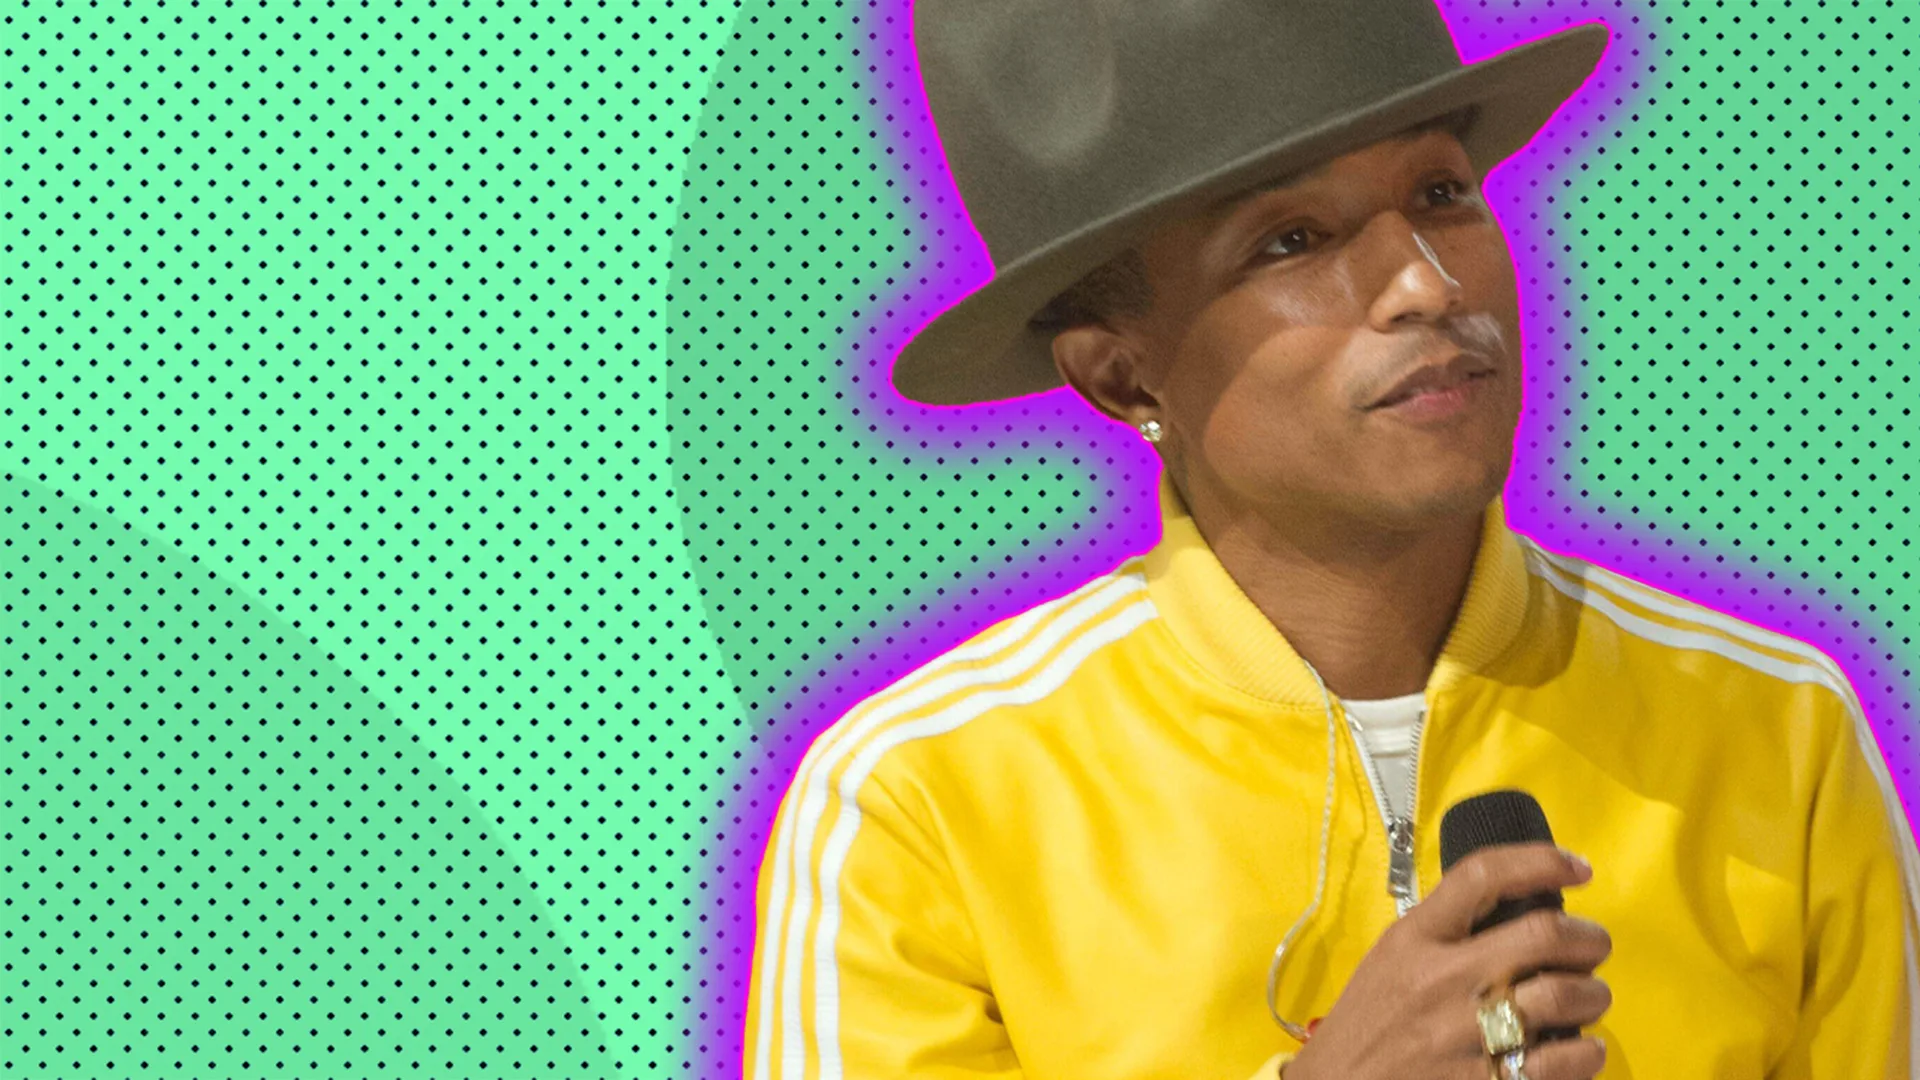 Pharrell Williams holding a mic with a green textured background and purple halo glow